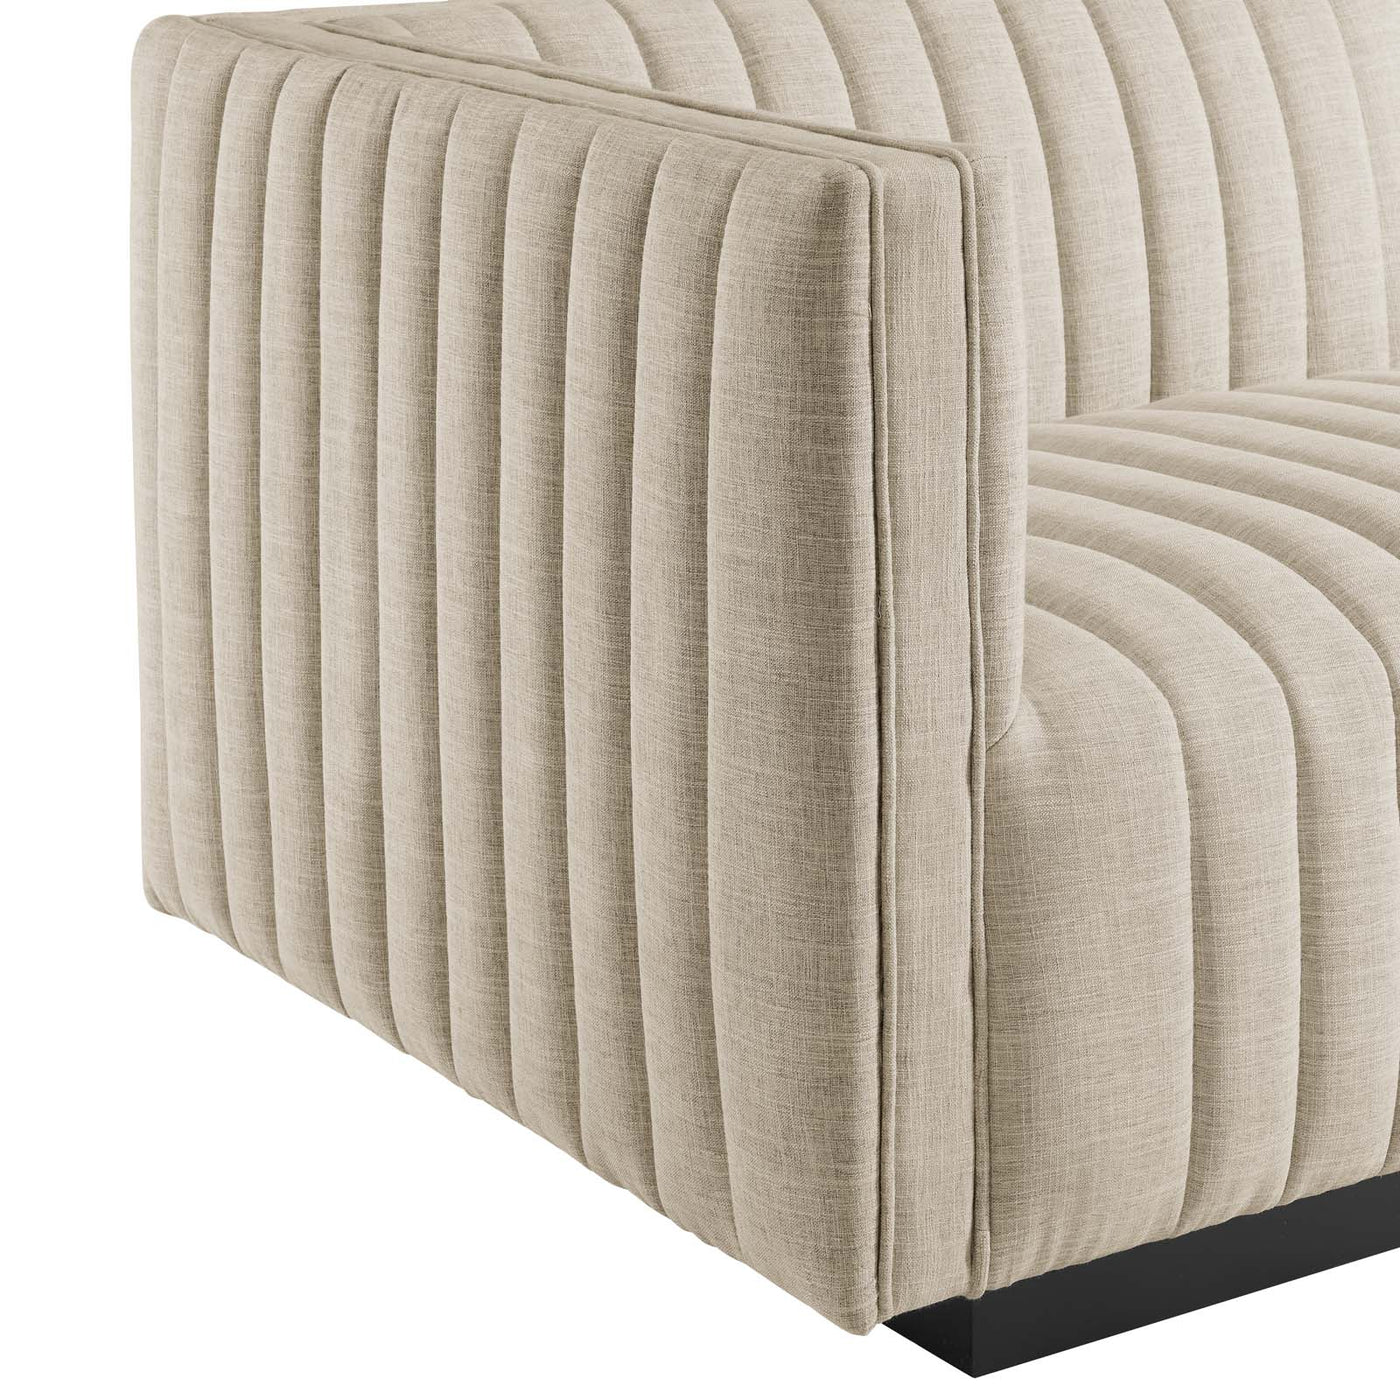 Conjure Channel Tufted Upholstered Fabric Left-Arm Chair